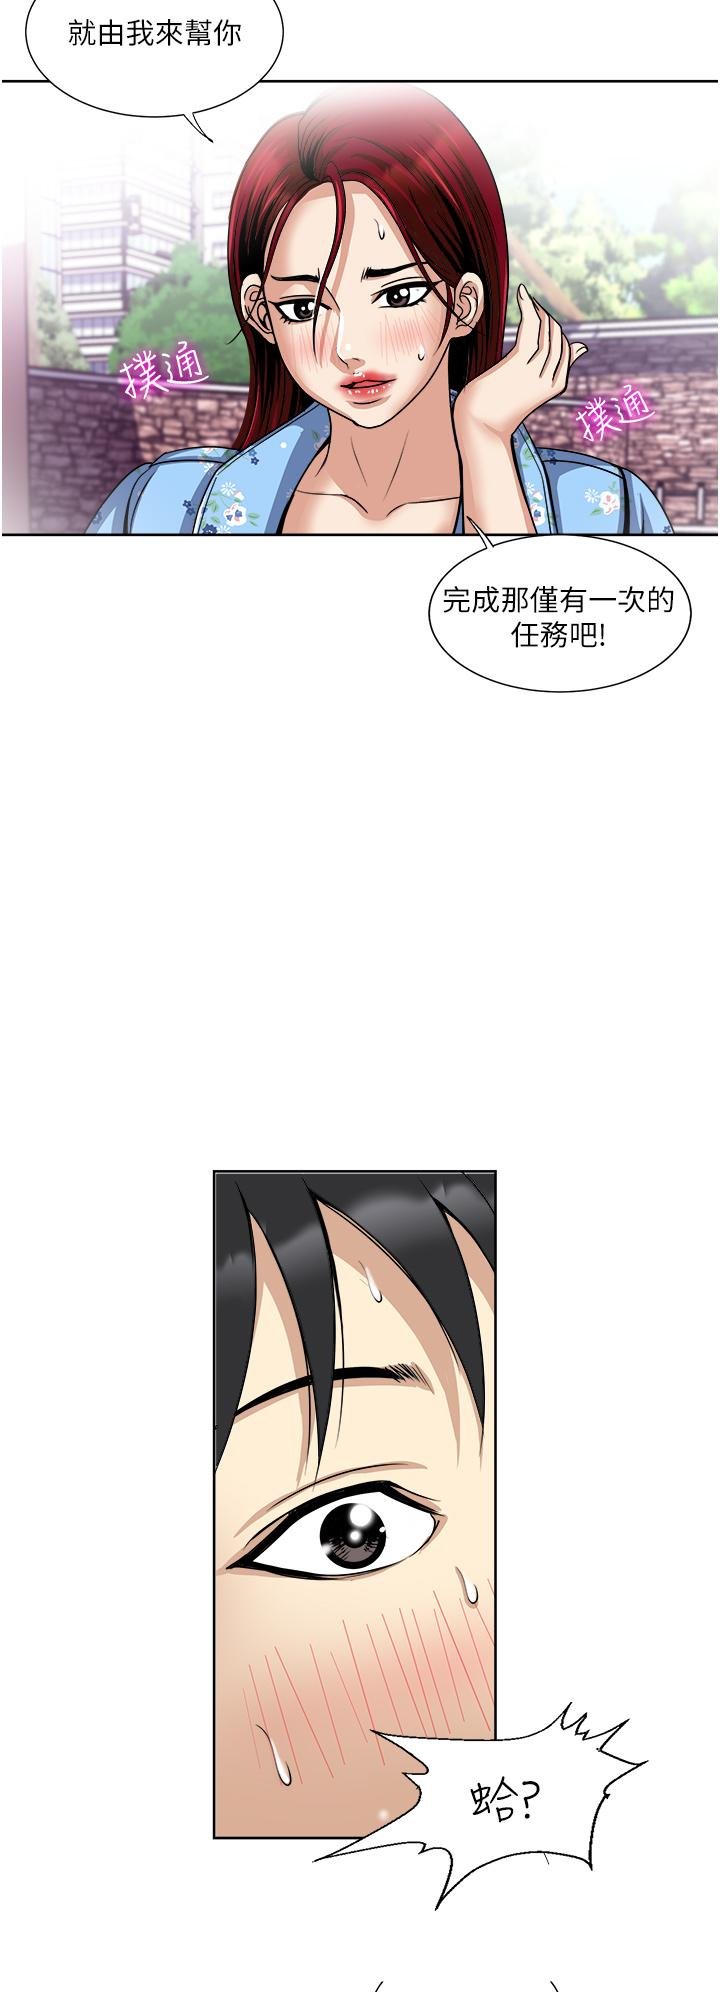 just-once-raw-chap-36-19